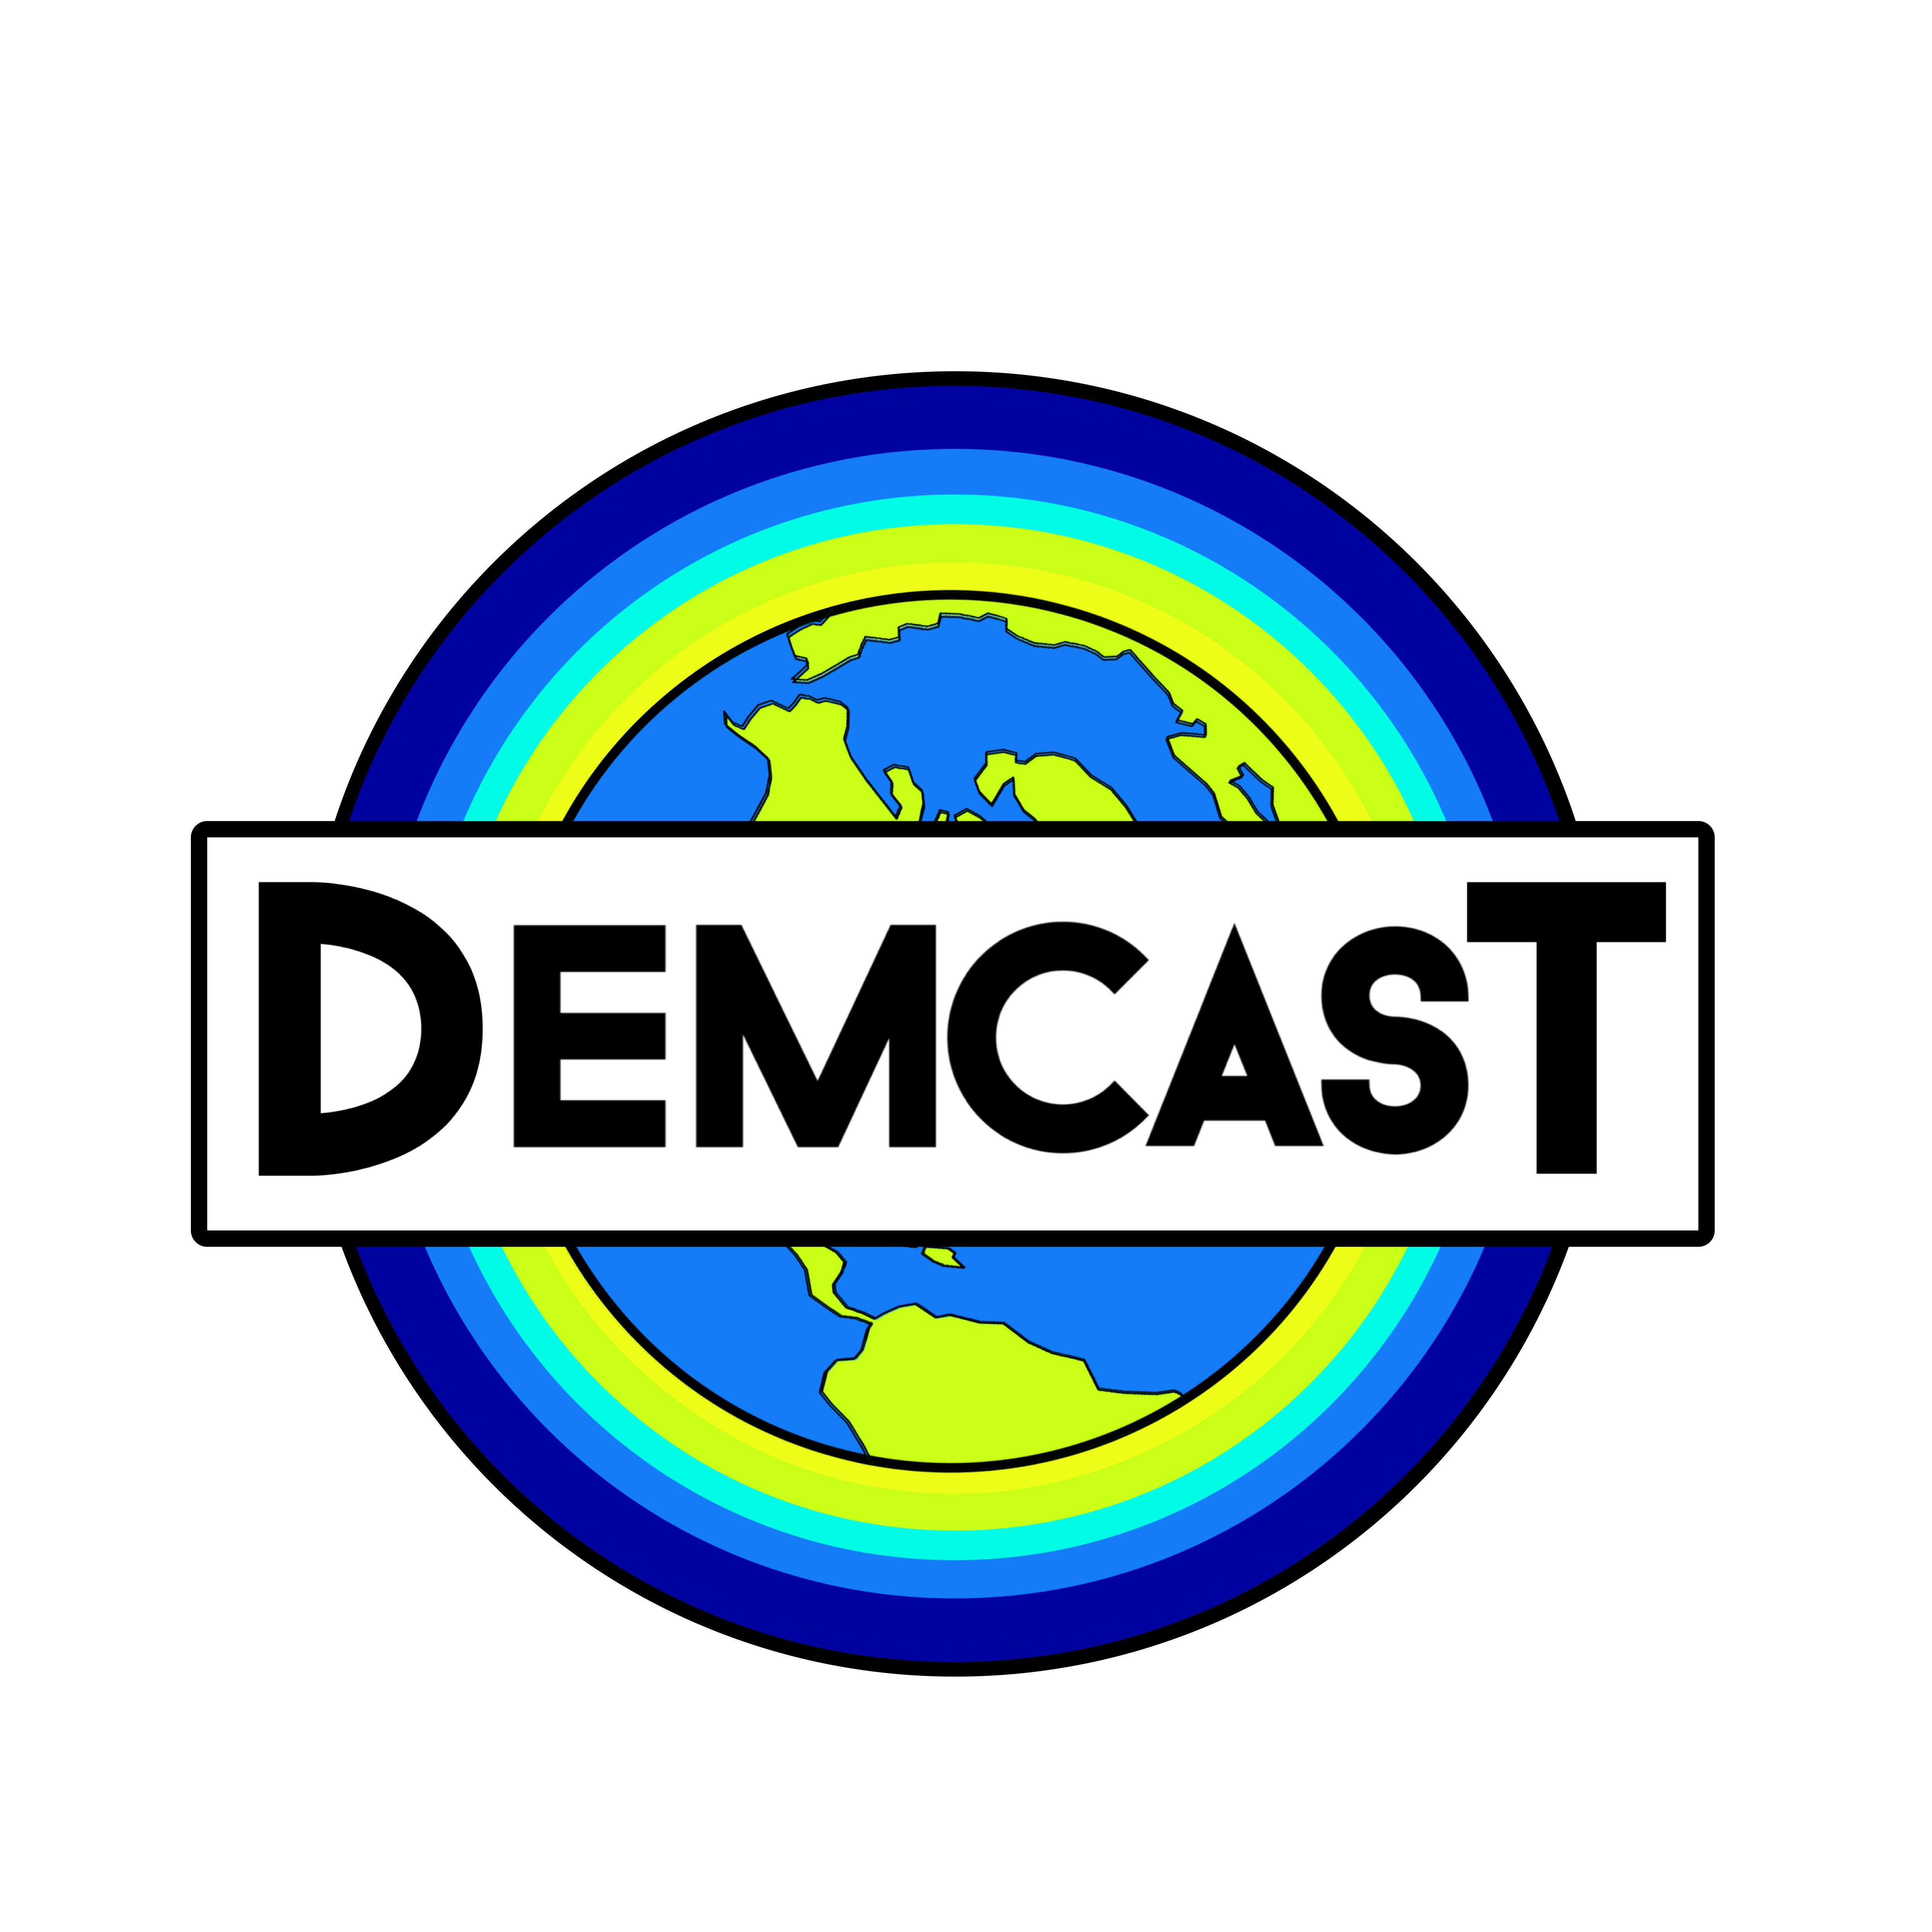 The Digital Drumbeat by DemCast